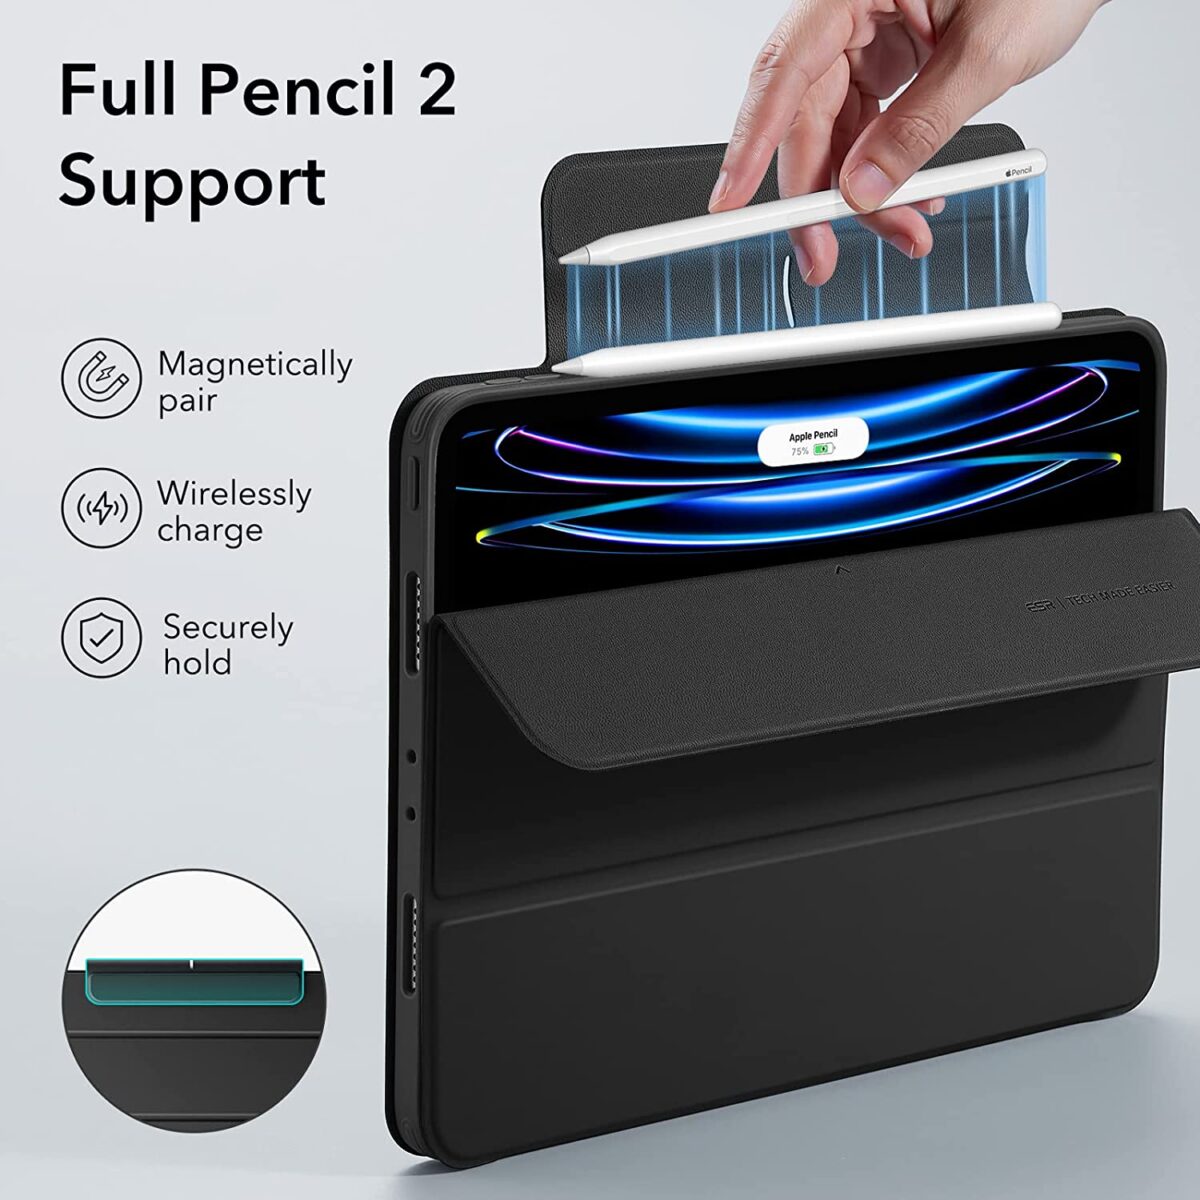 Pencil 2 supported iPad Pro 11 Inch Case